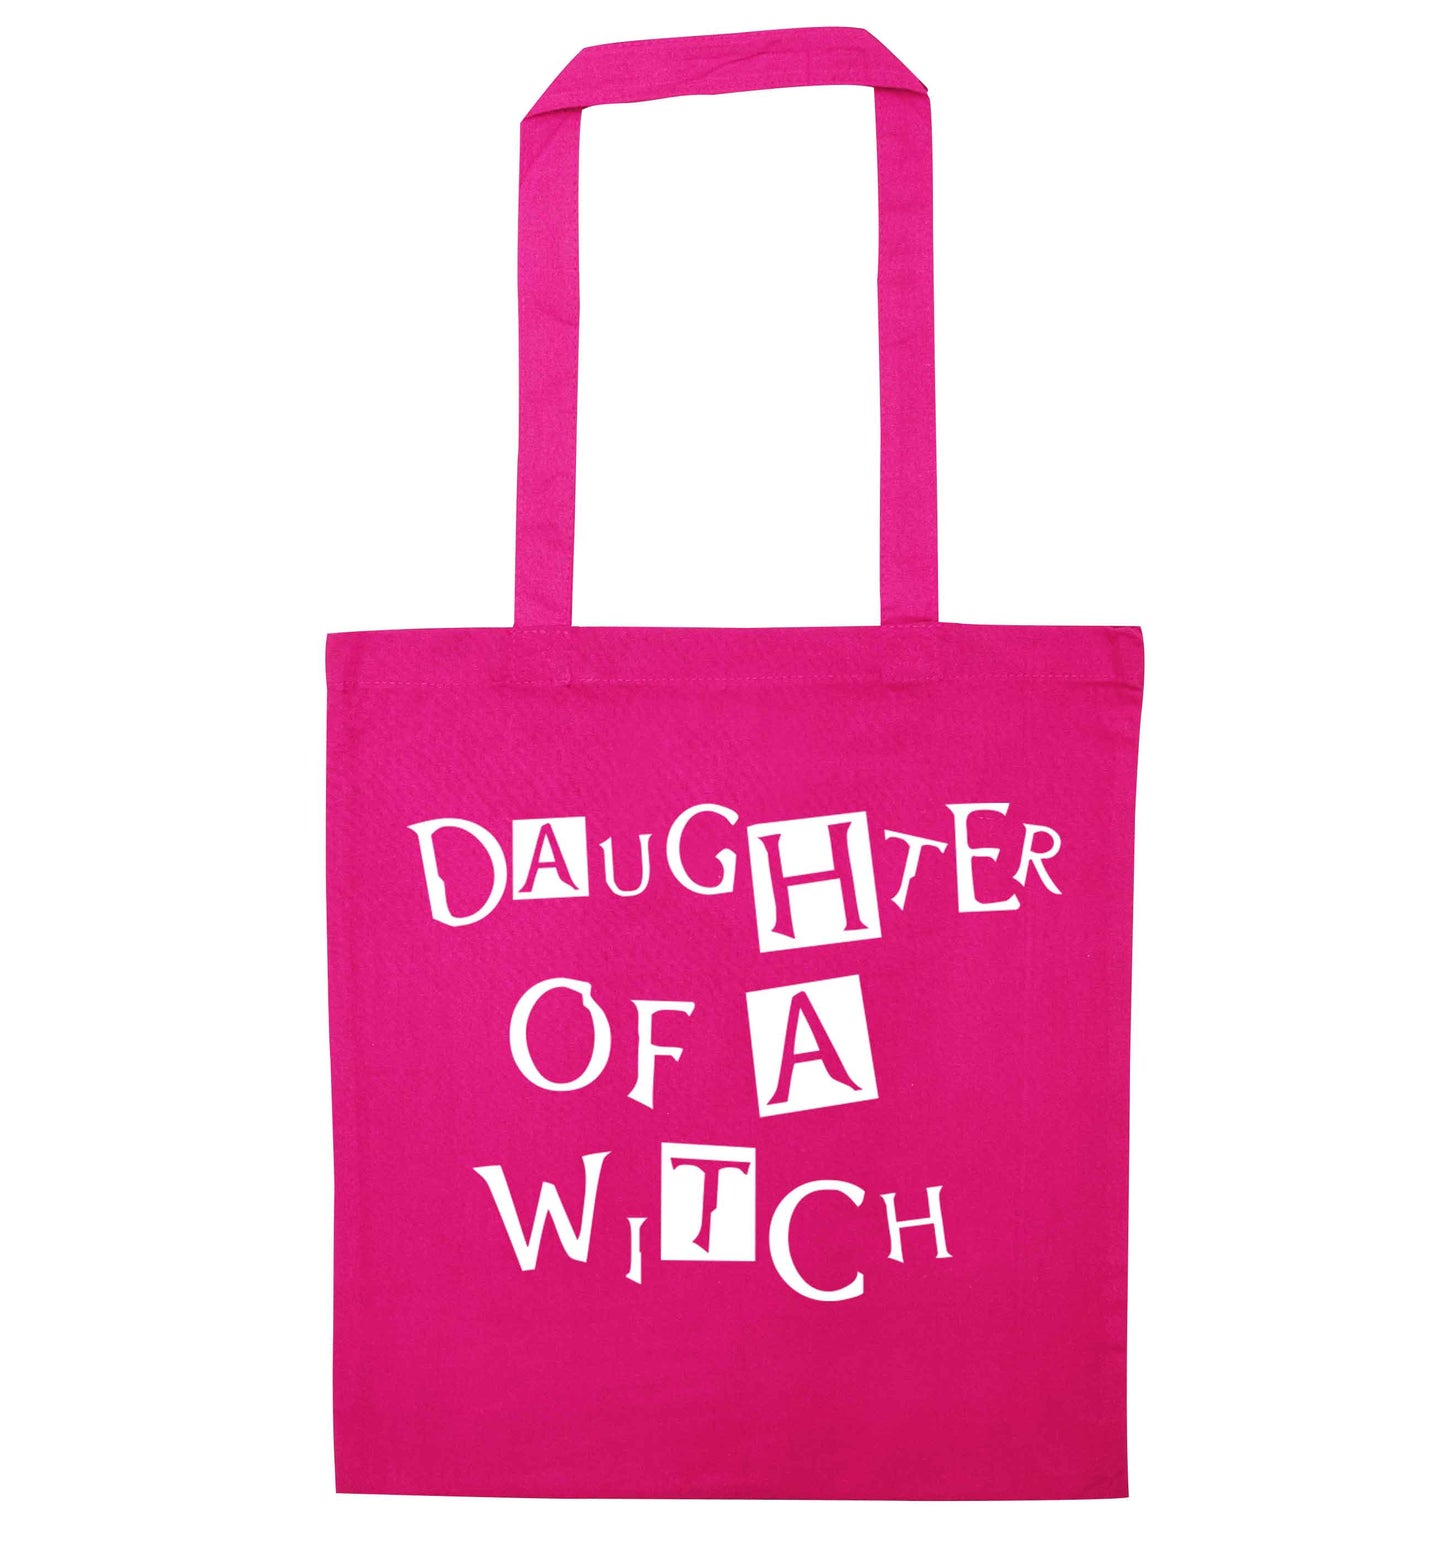 Daughter of a witch pink tote bag